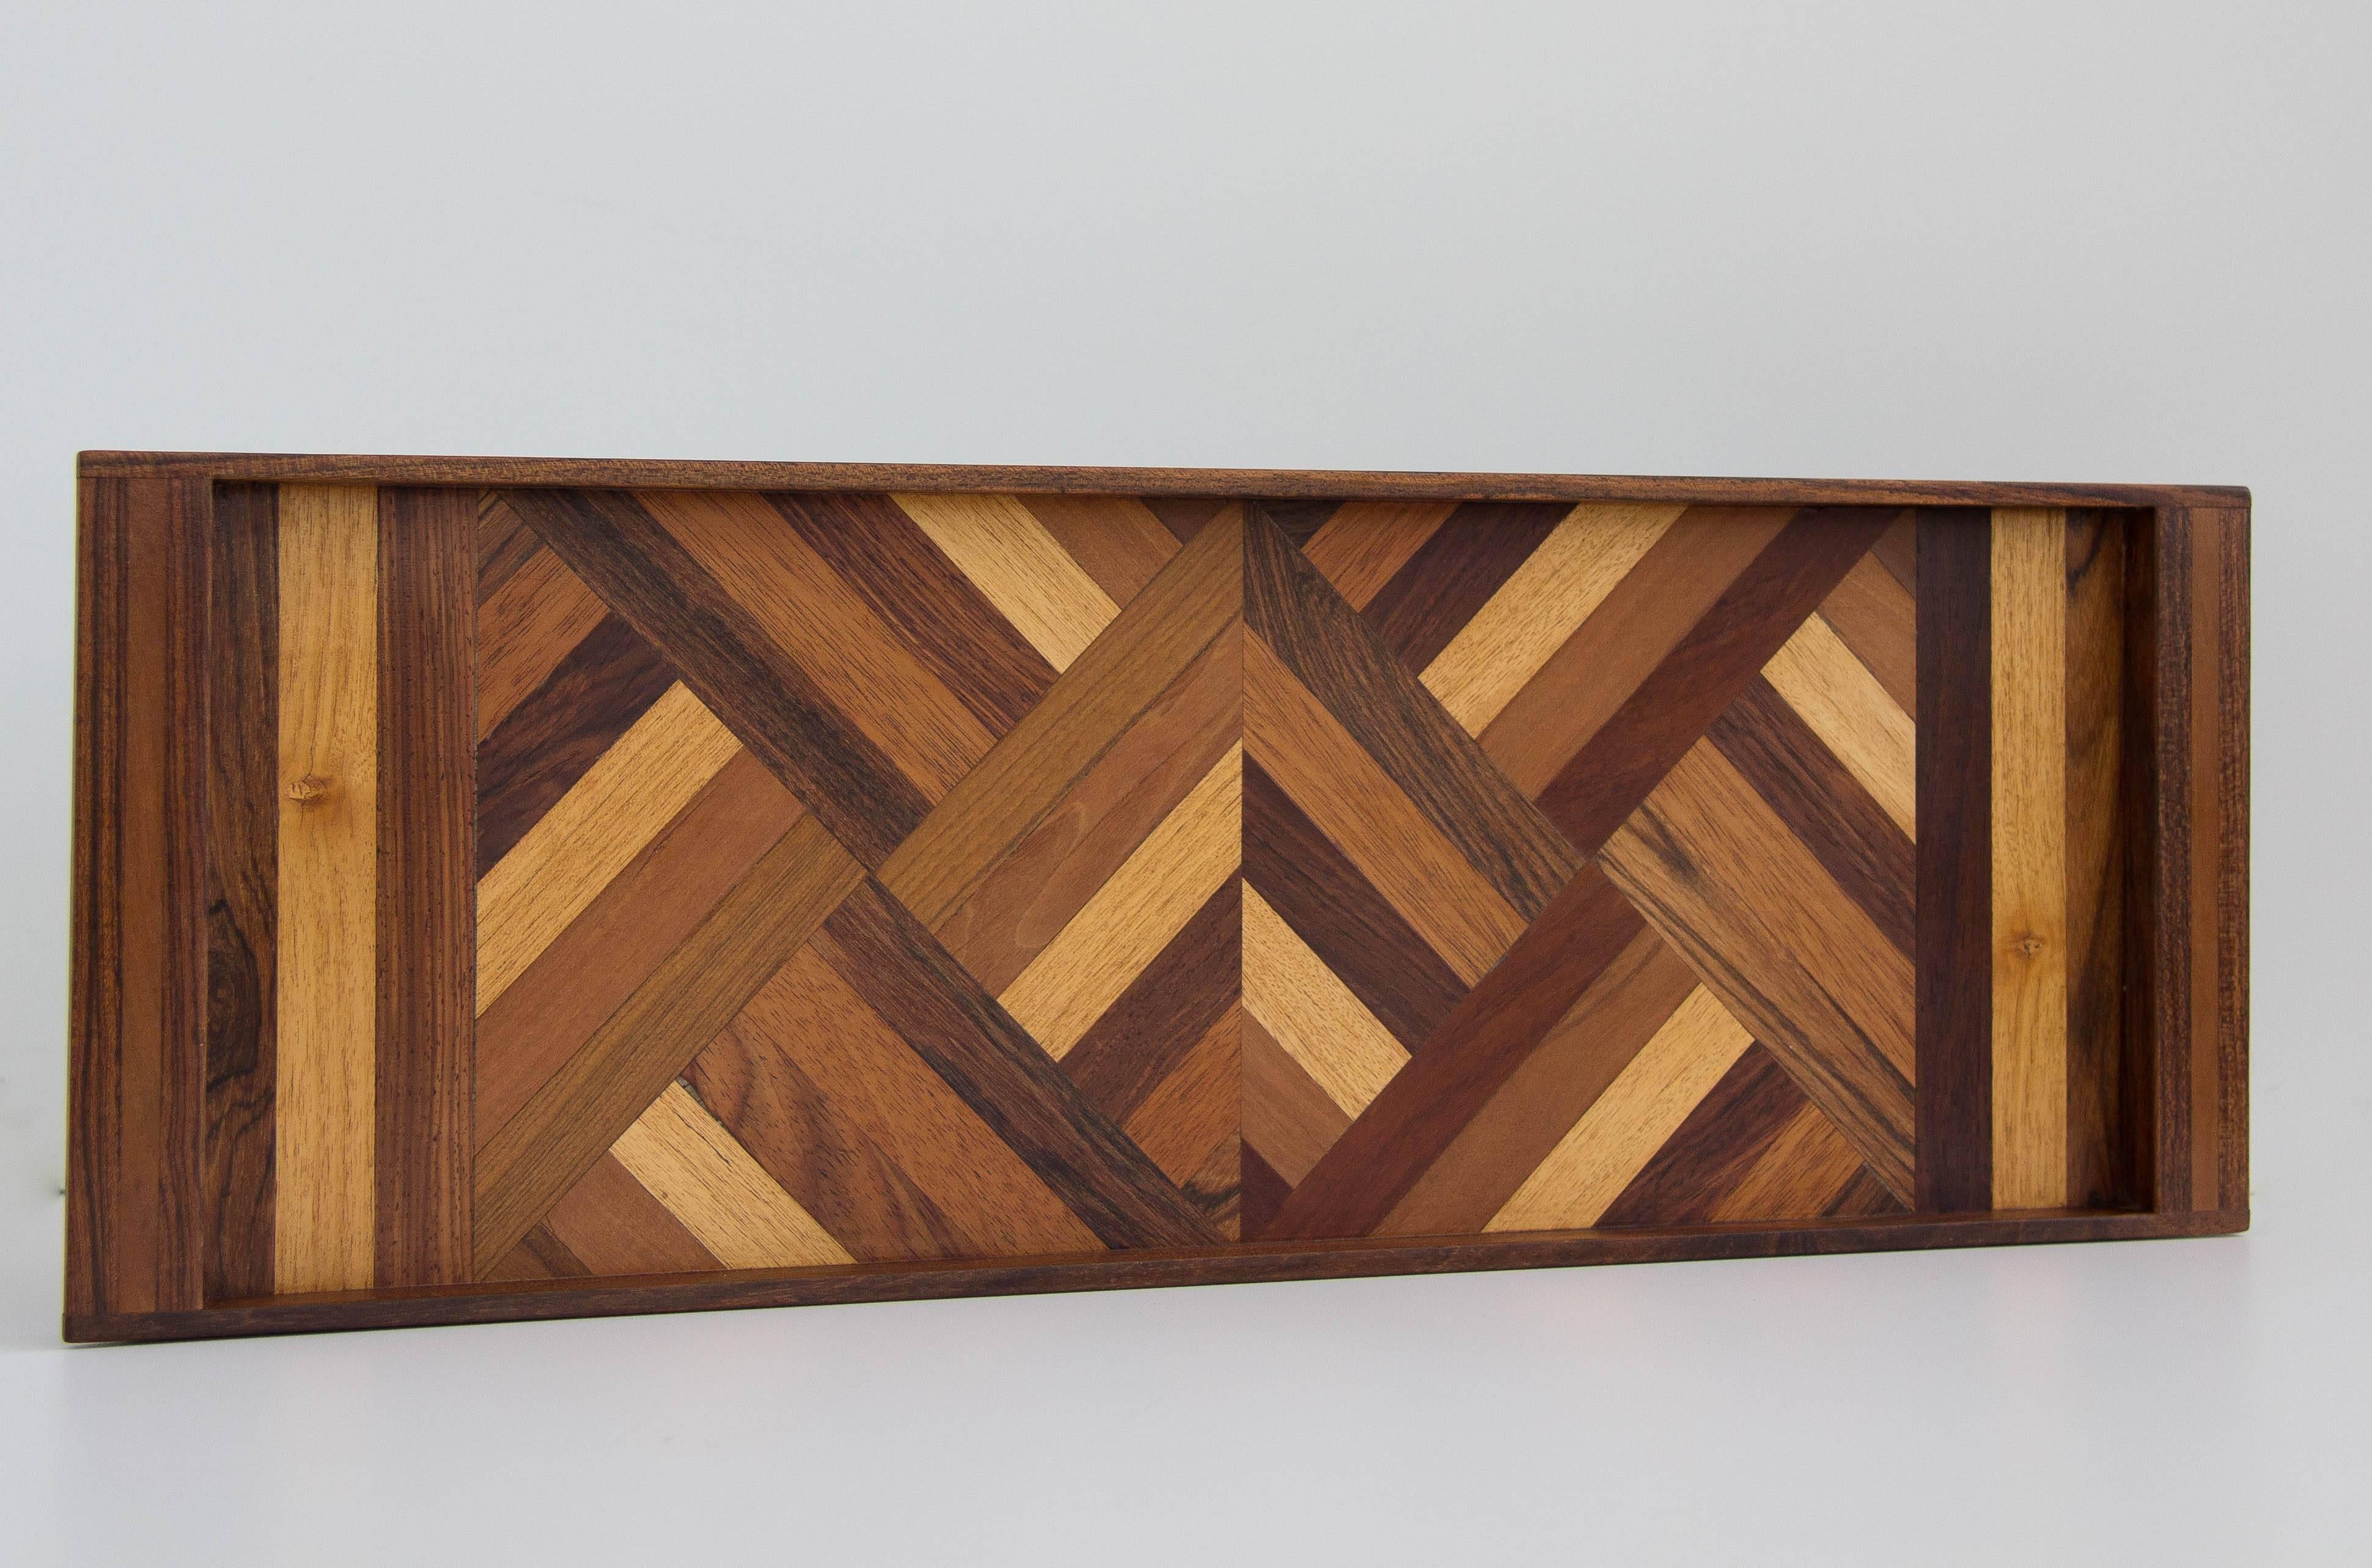 A narrow serving tray by Don Shoemaker for Senal of Mexico. The tray has a dark tropical wood frame with integrated handles at either end, and the tray surface is inlaid with precious woods in a geometric pattern. 

Condition: The tray has been